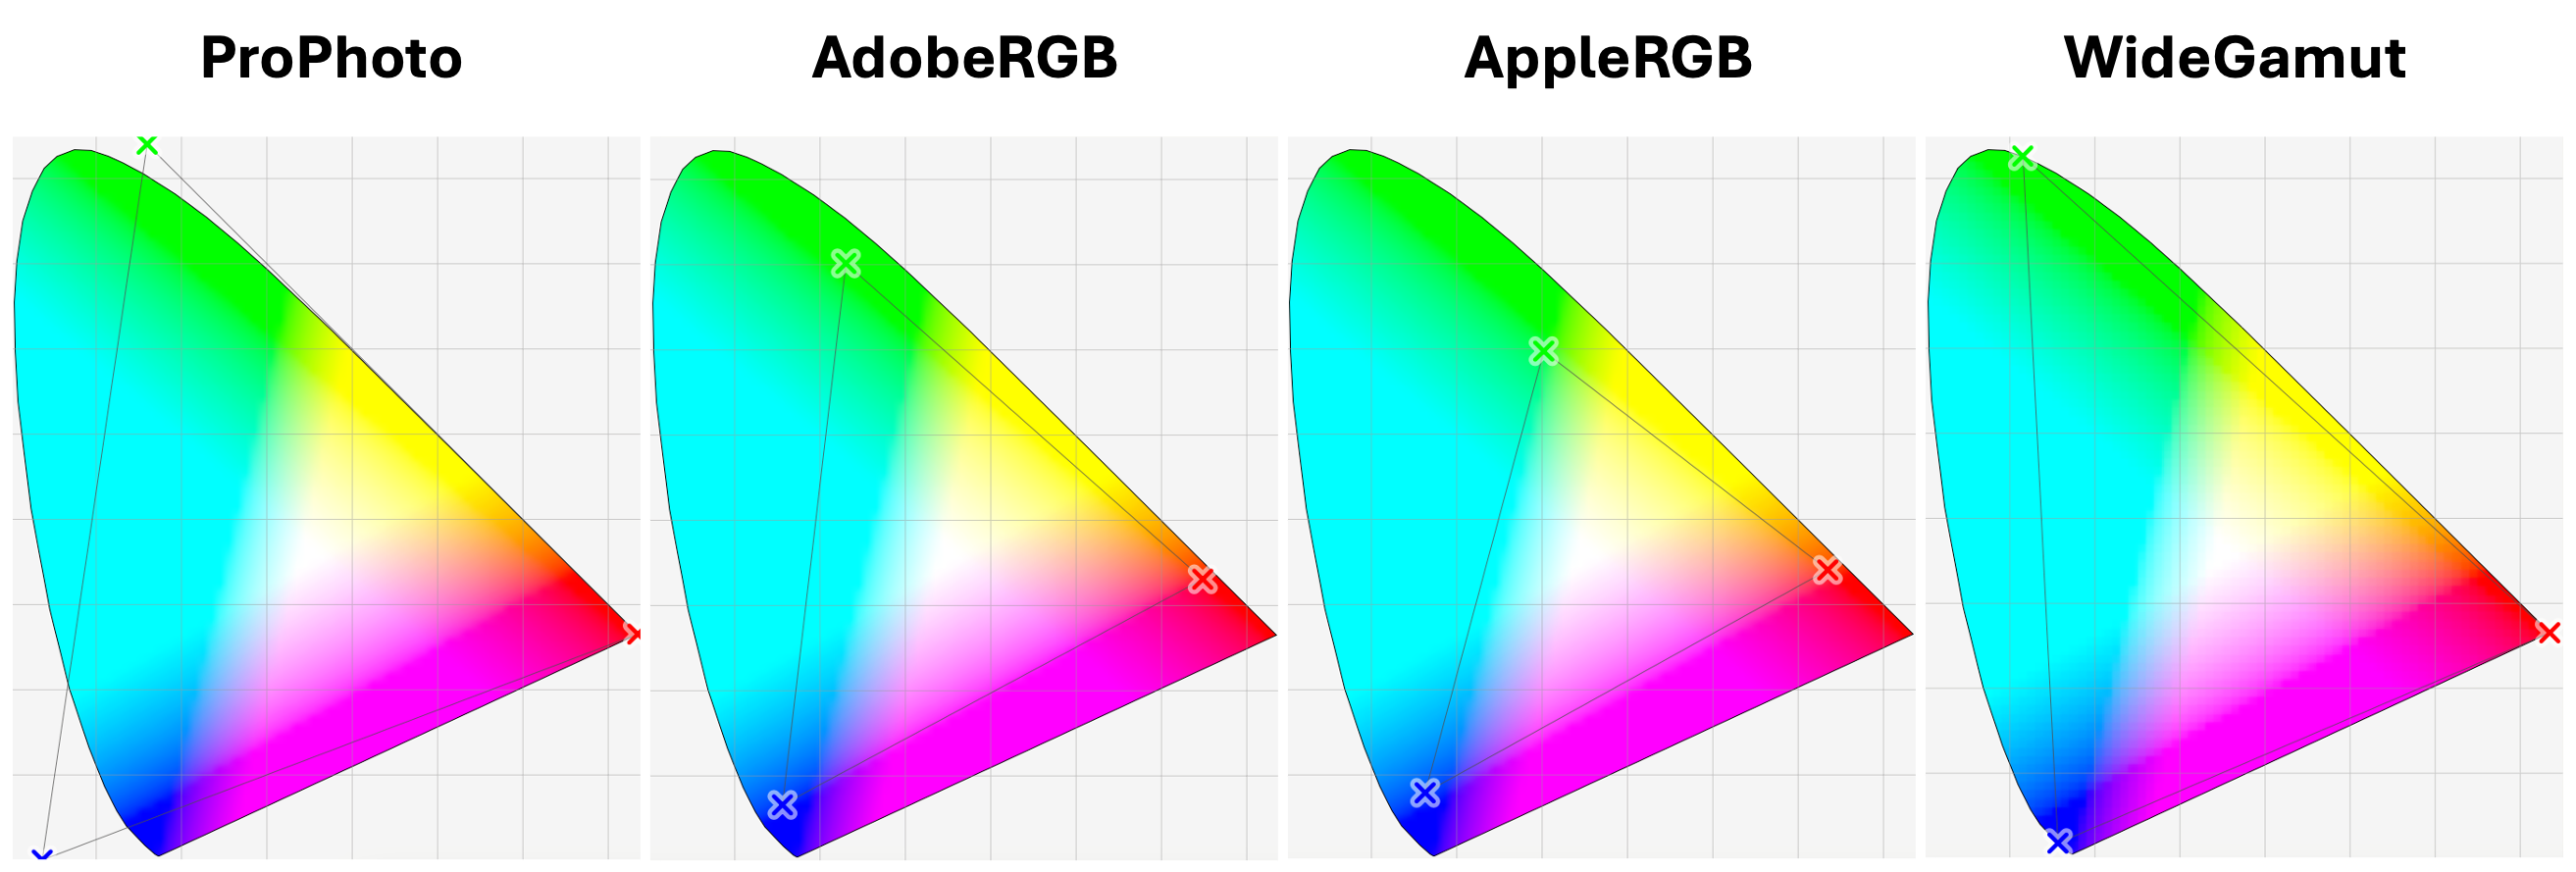 Fig. 1. Color gamut of the ICC profiles